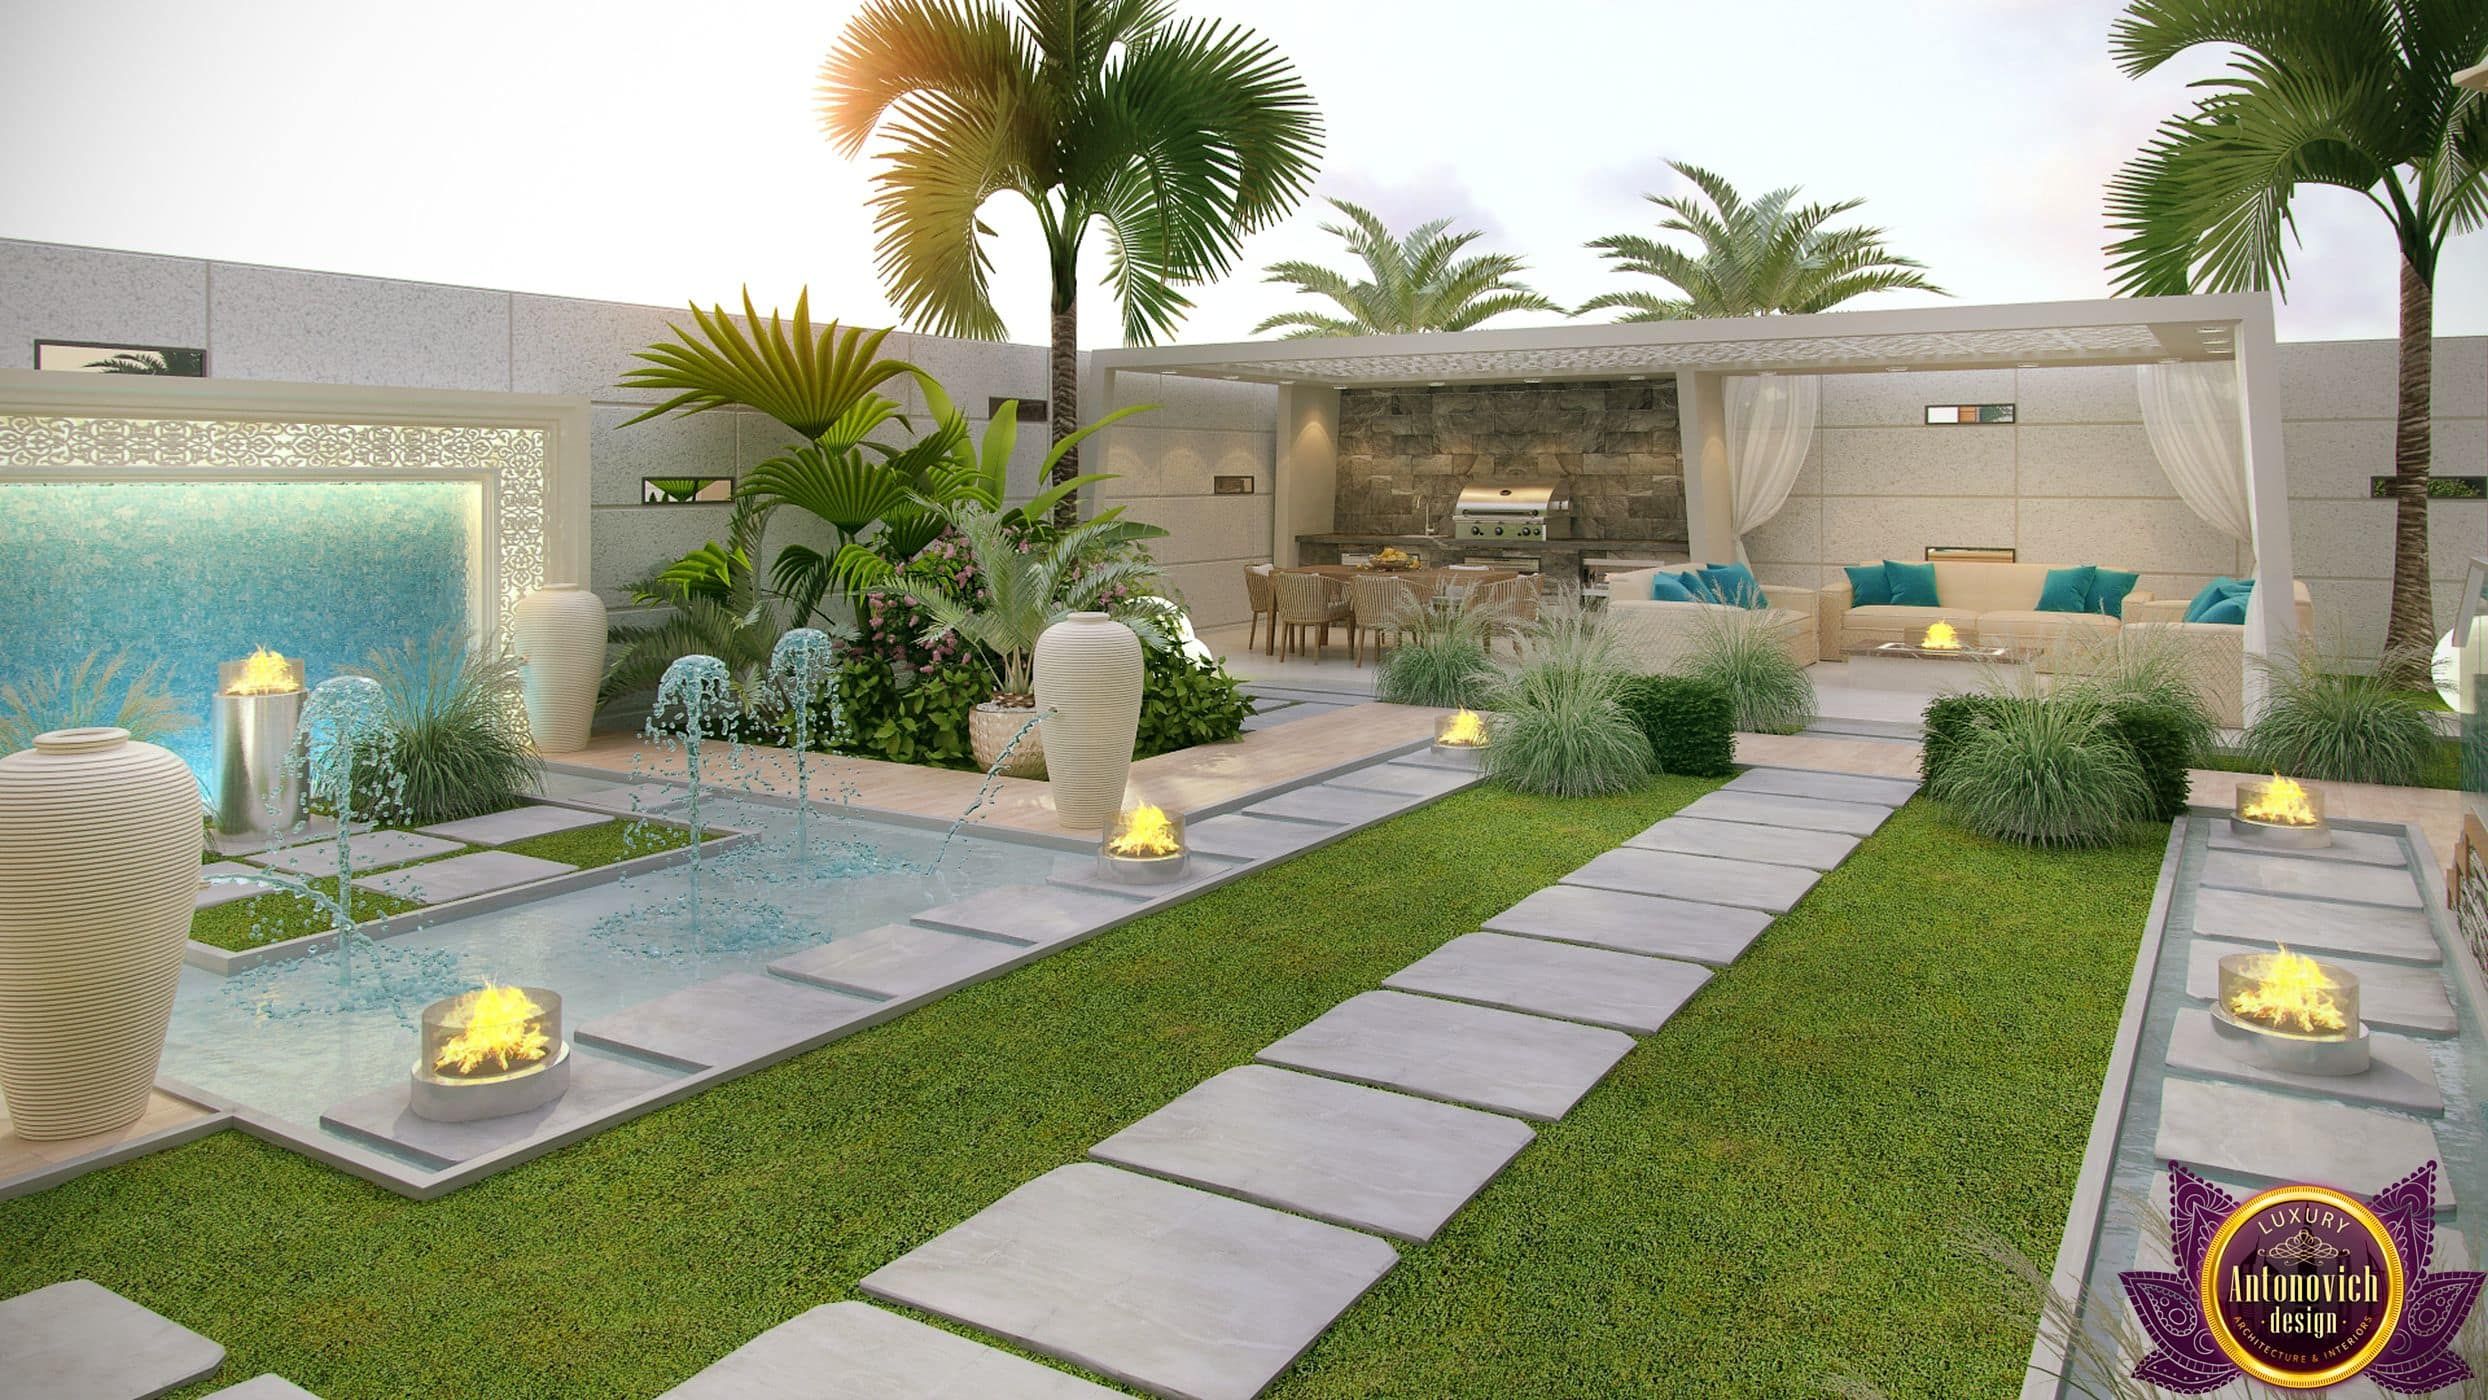 Mediterranean Style House Landscaping Ideas